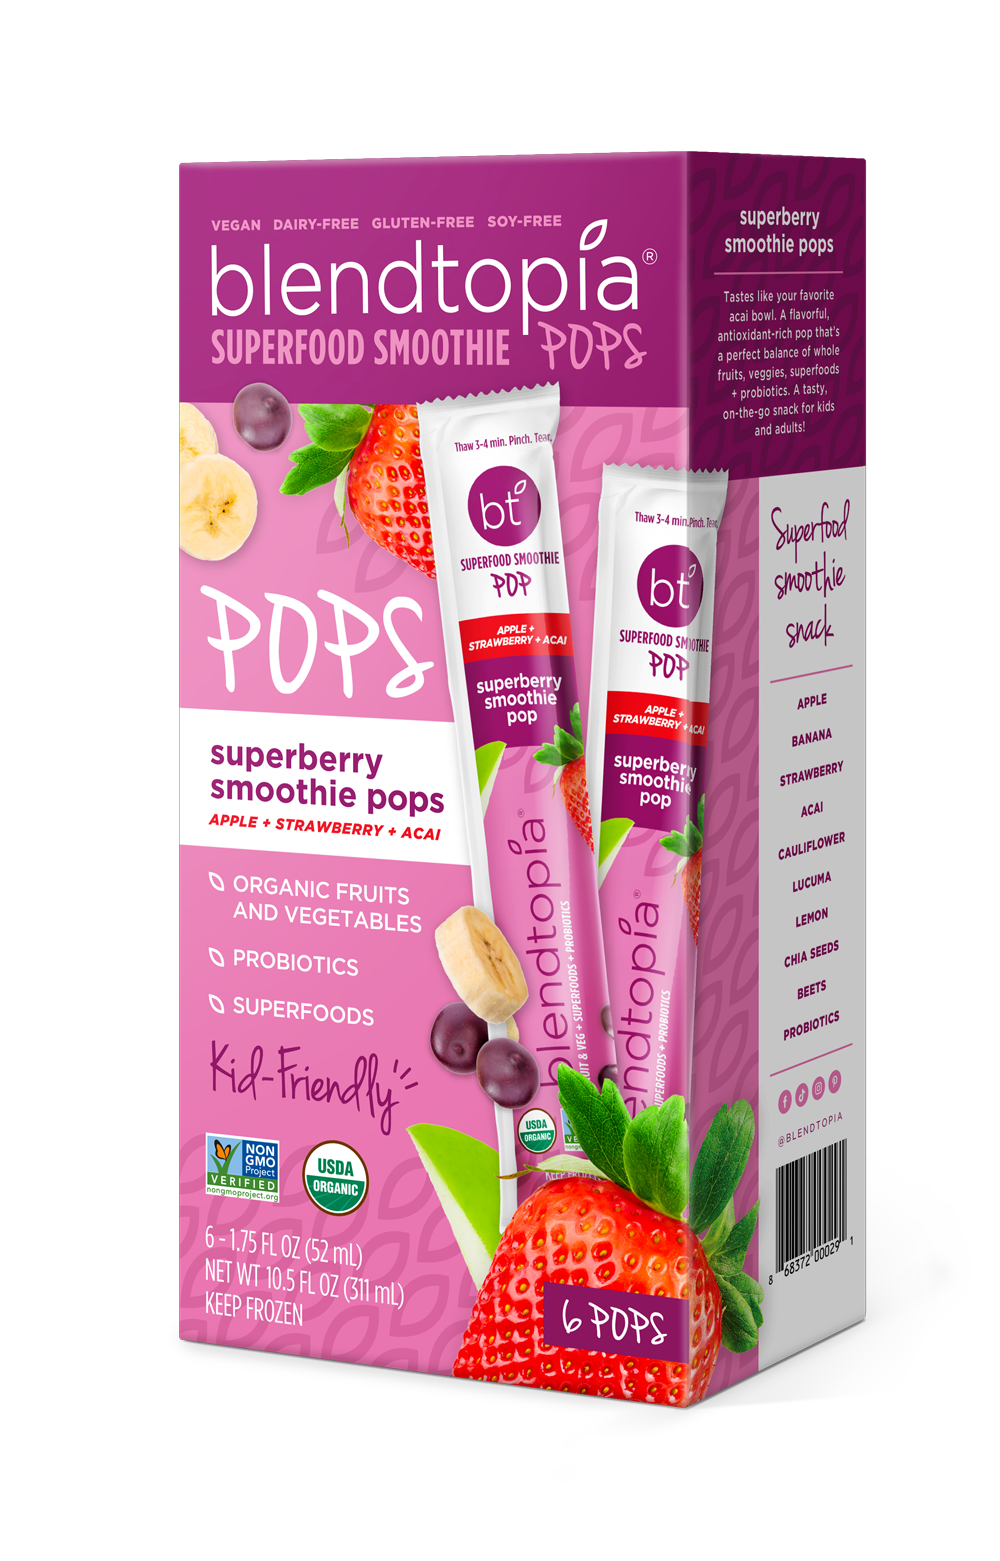 Blendtopia Superfood Smoothie Kit Review + Coupon! - Hello Subscription